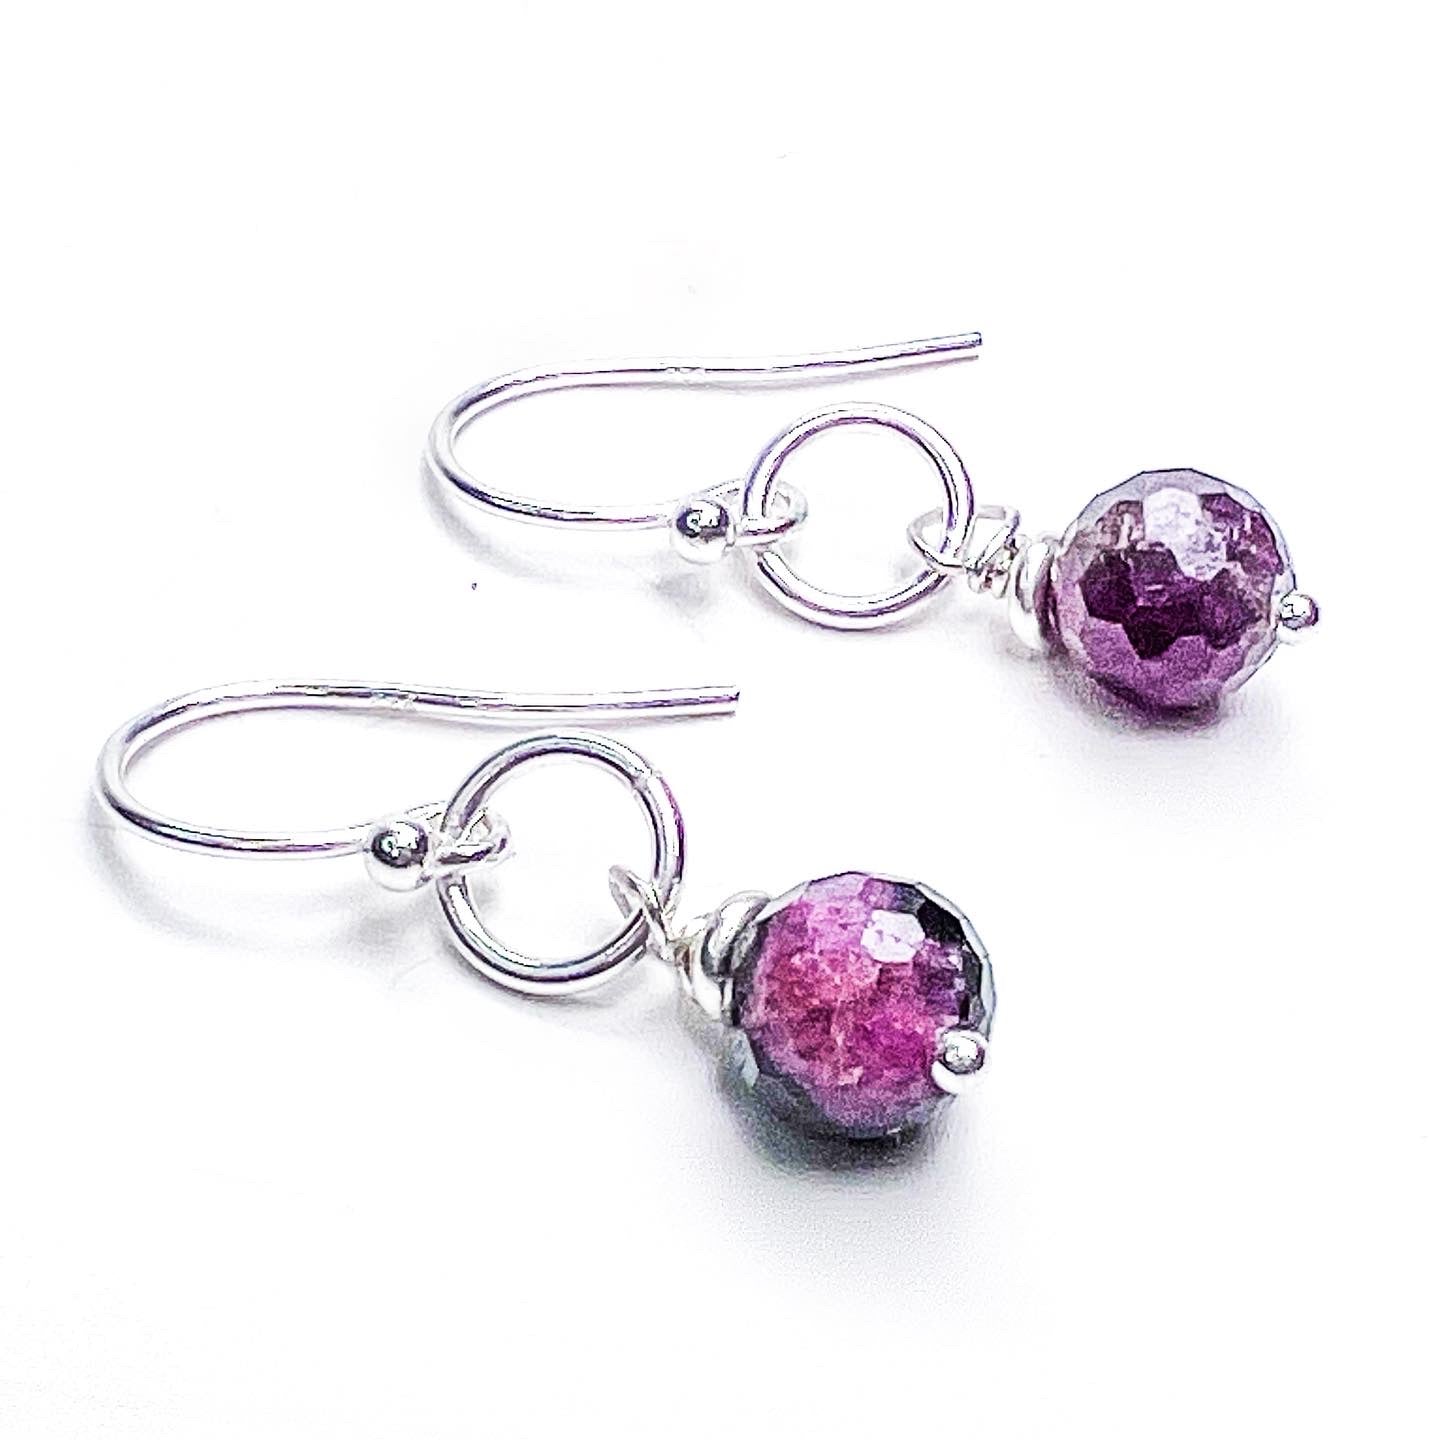 Faceted Tourmaline earrings in sterling silver